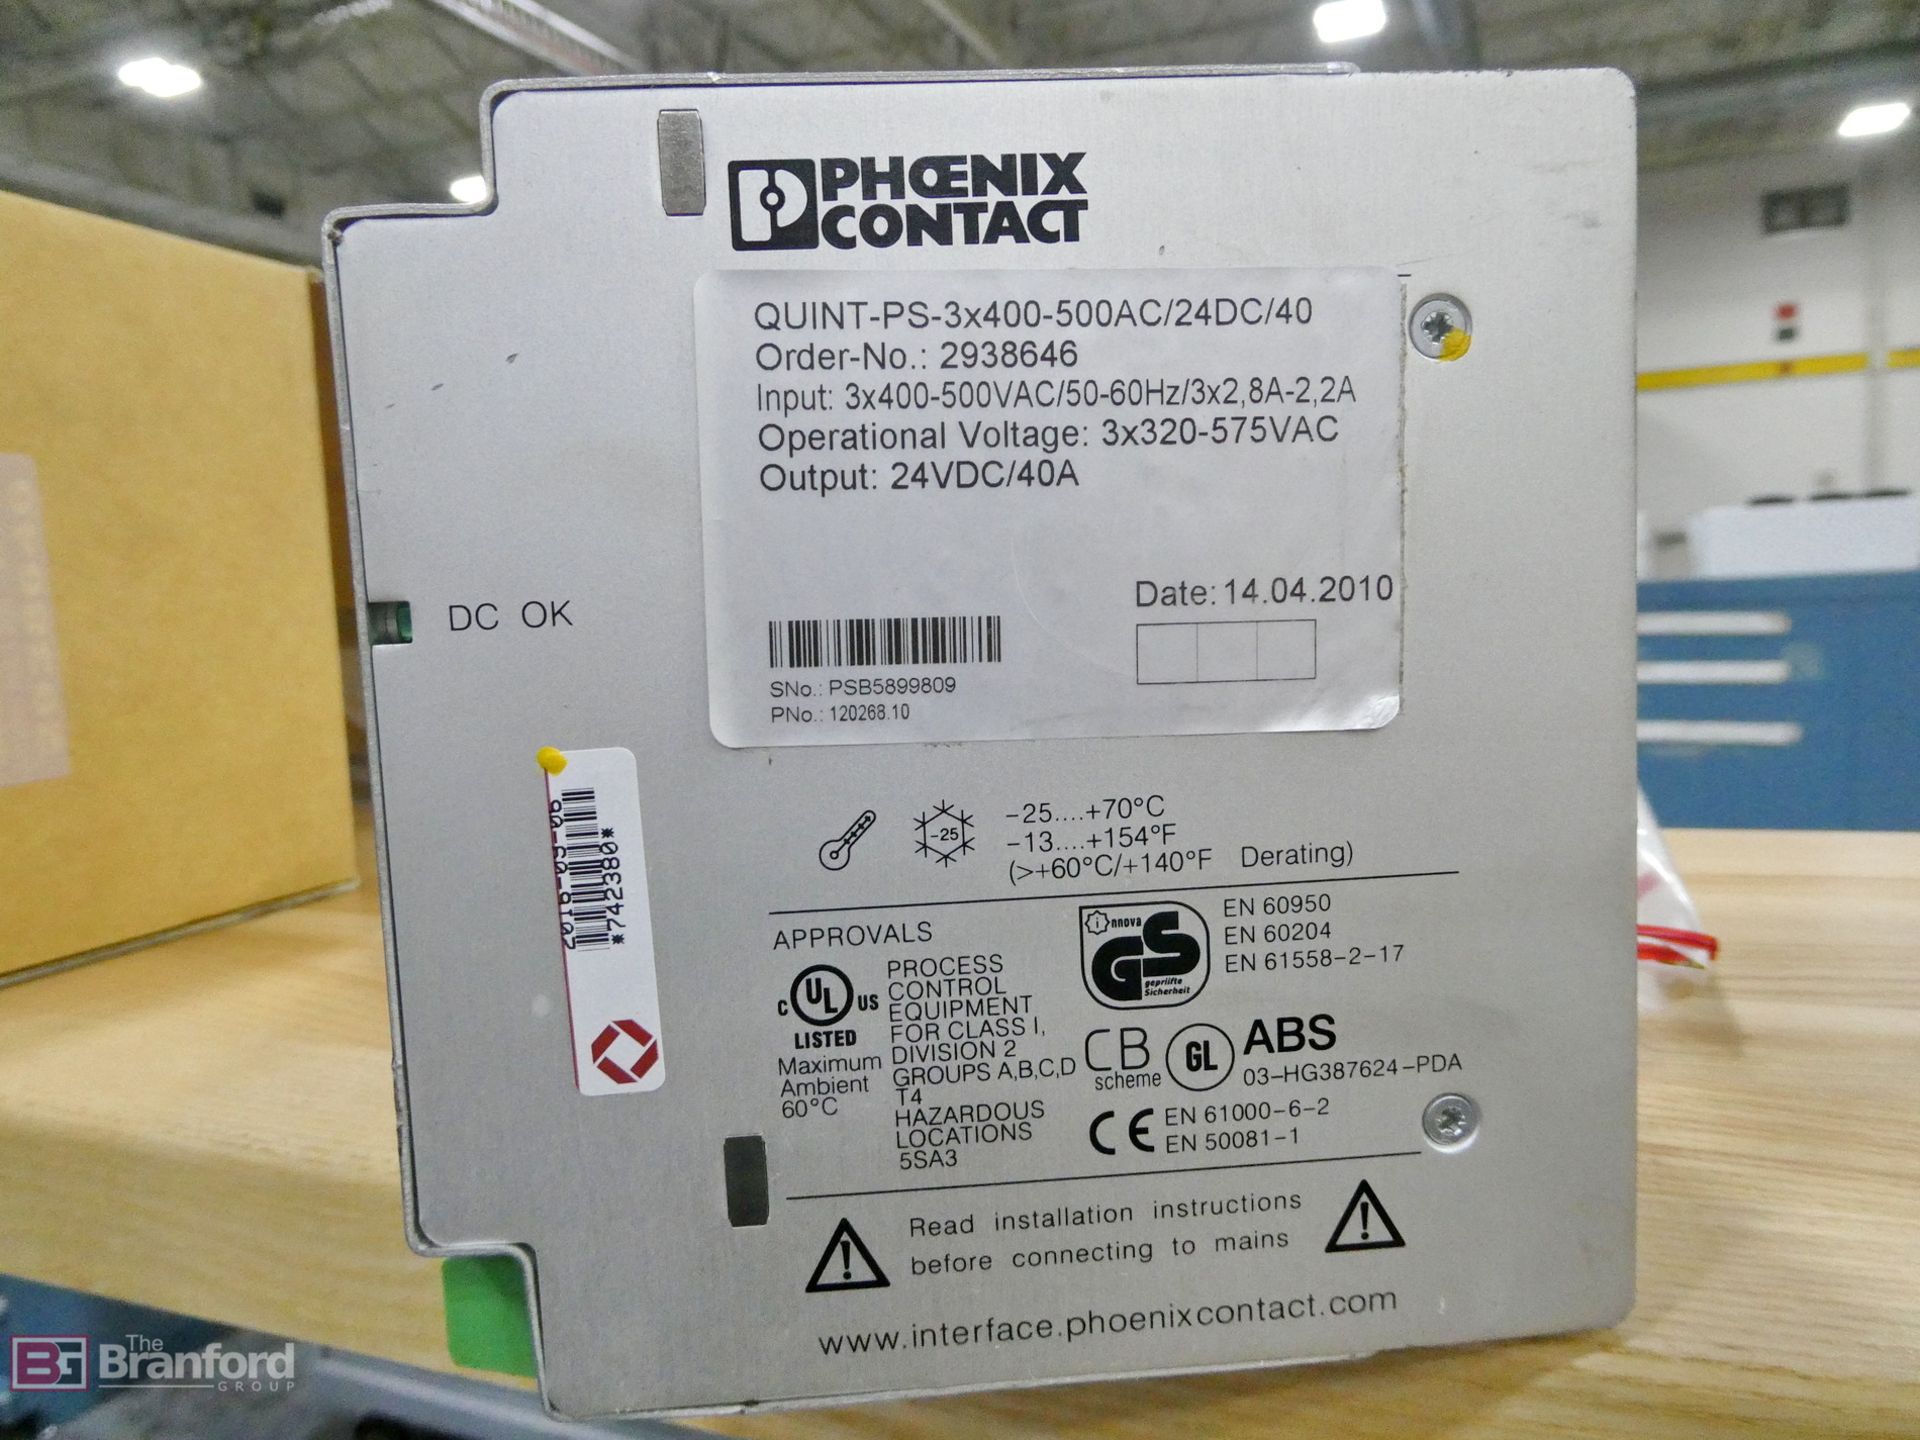 (2) Phoenix Contact Quint-PS-3x400-500AC/24DC/40, Power Supplies - Image 3 of 6